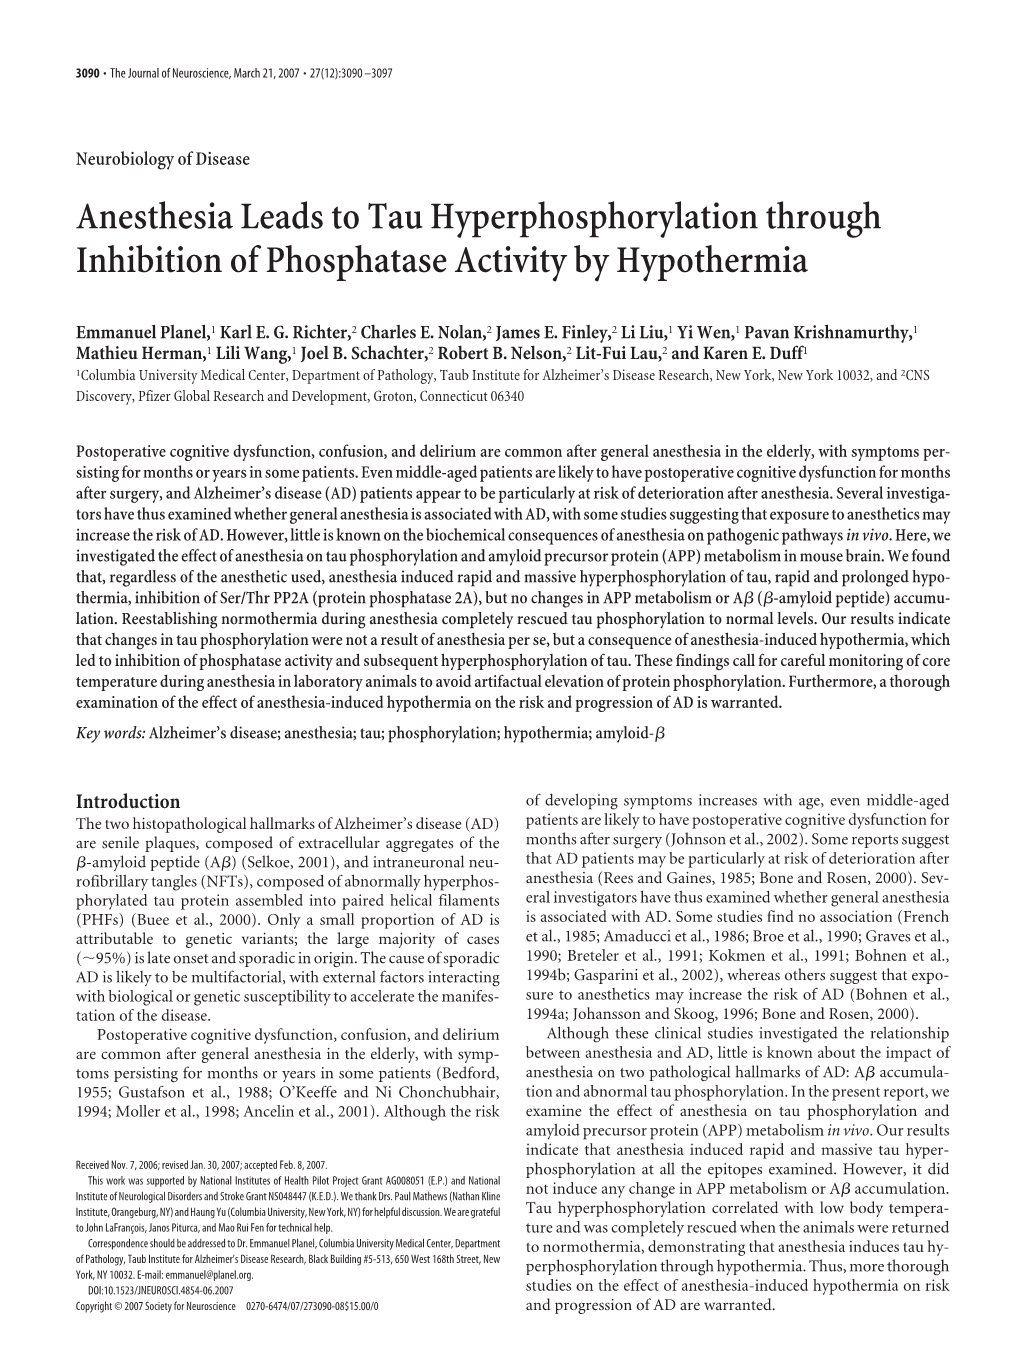 Anesthesia Leads to Tau Hyperphosphorylation Through Inhibition of Phosphatase Activity by Hypothermia